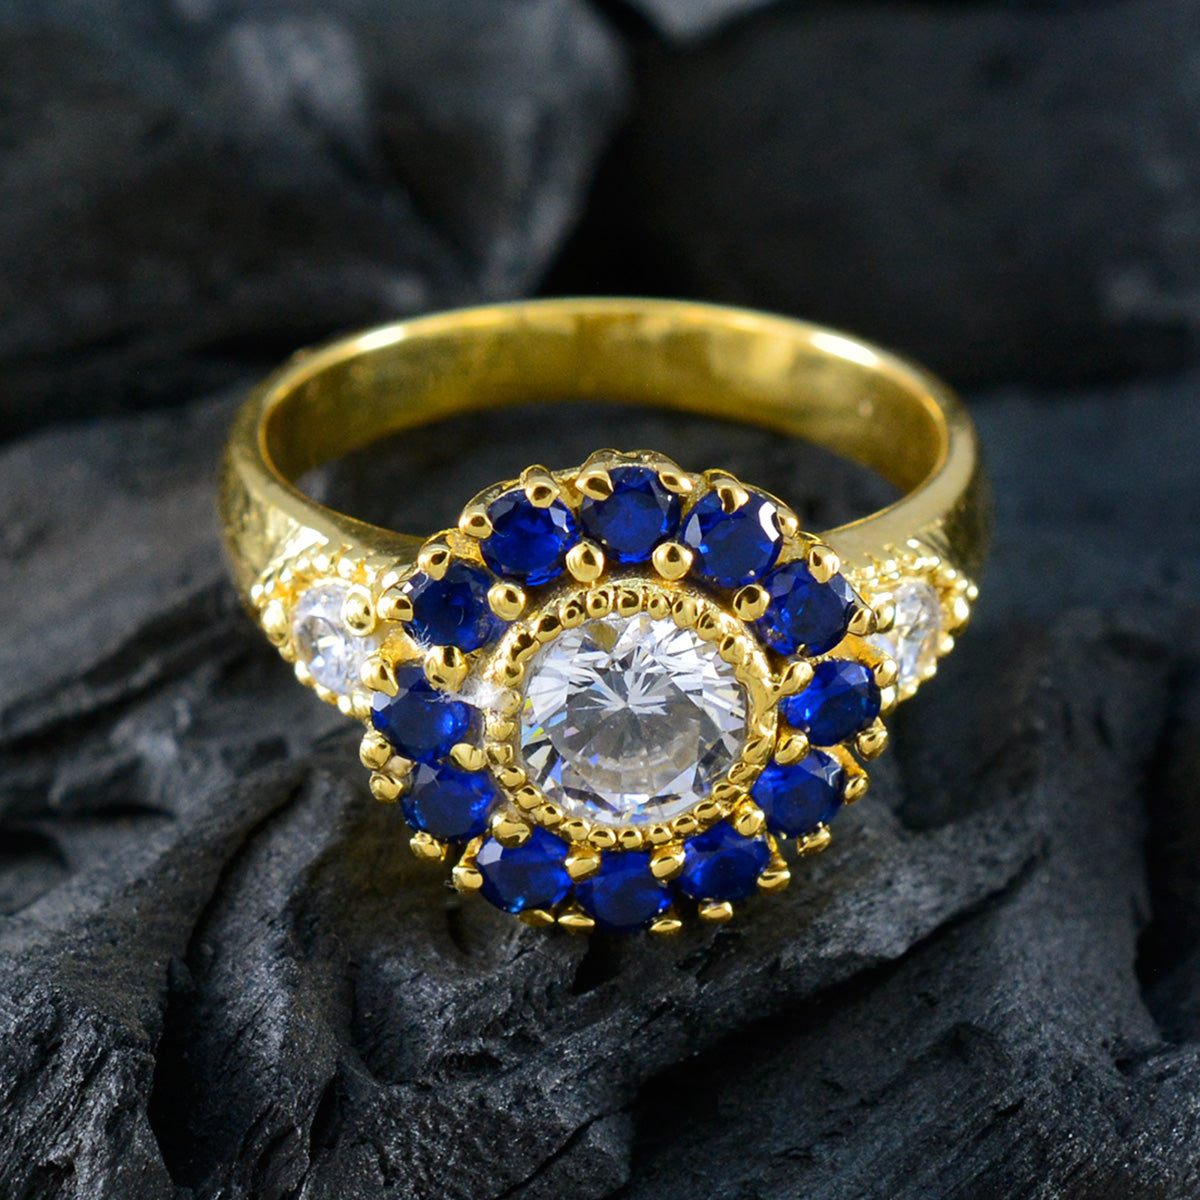 Riyo In Quantity Silver Ring With Yellow Gold Plating Blue Sapphire CZ Stone Round Shape Prong Setting Handamde Jewelry Fathers Day Ring